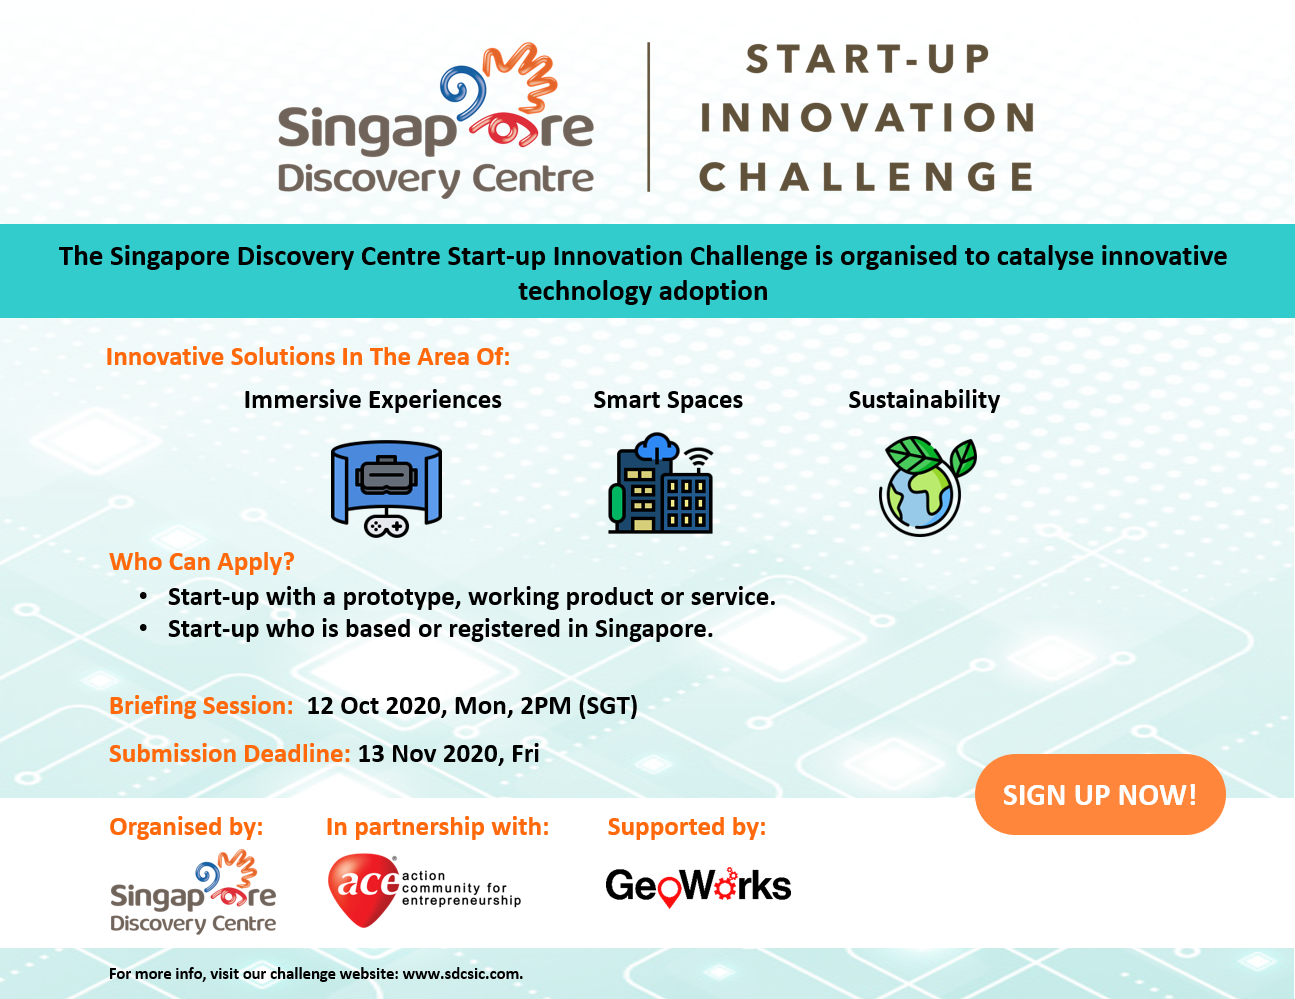 Singapore Discovery Centre Start-Up Innovation Challenge